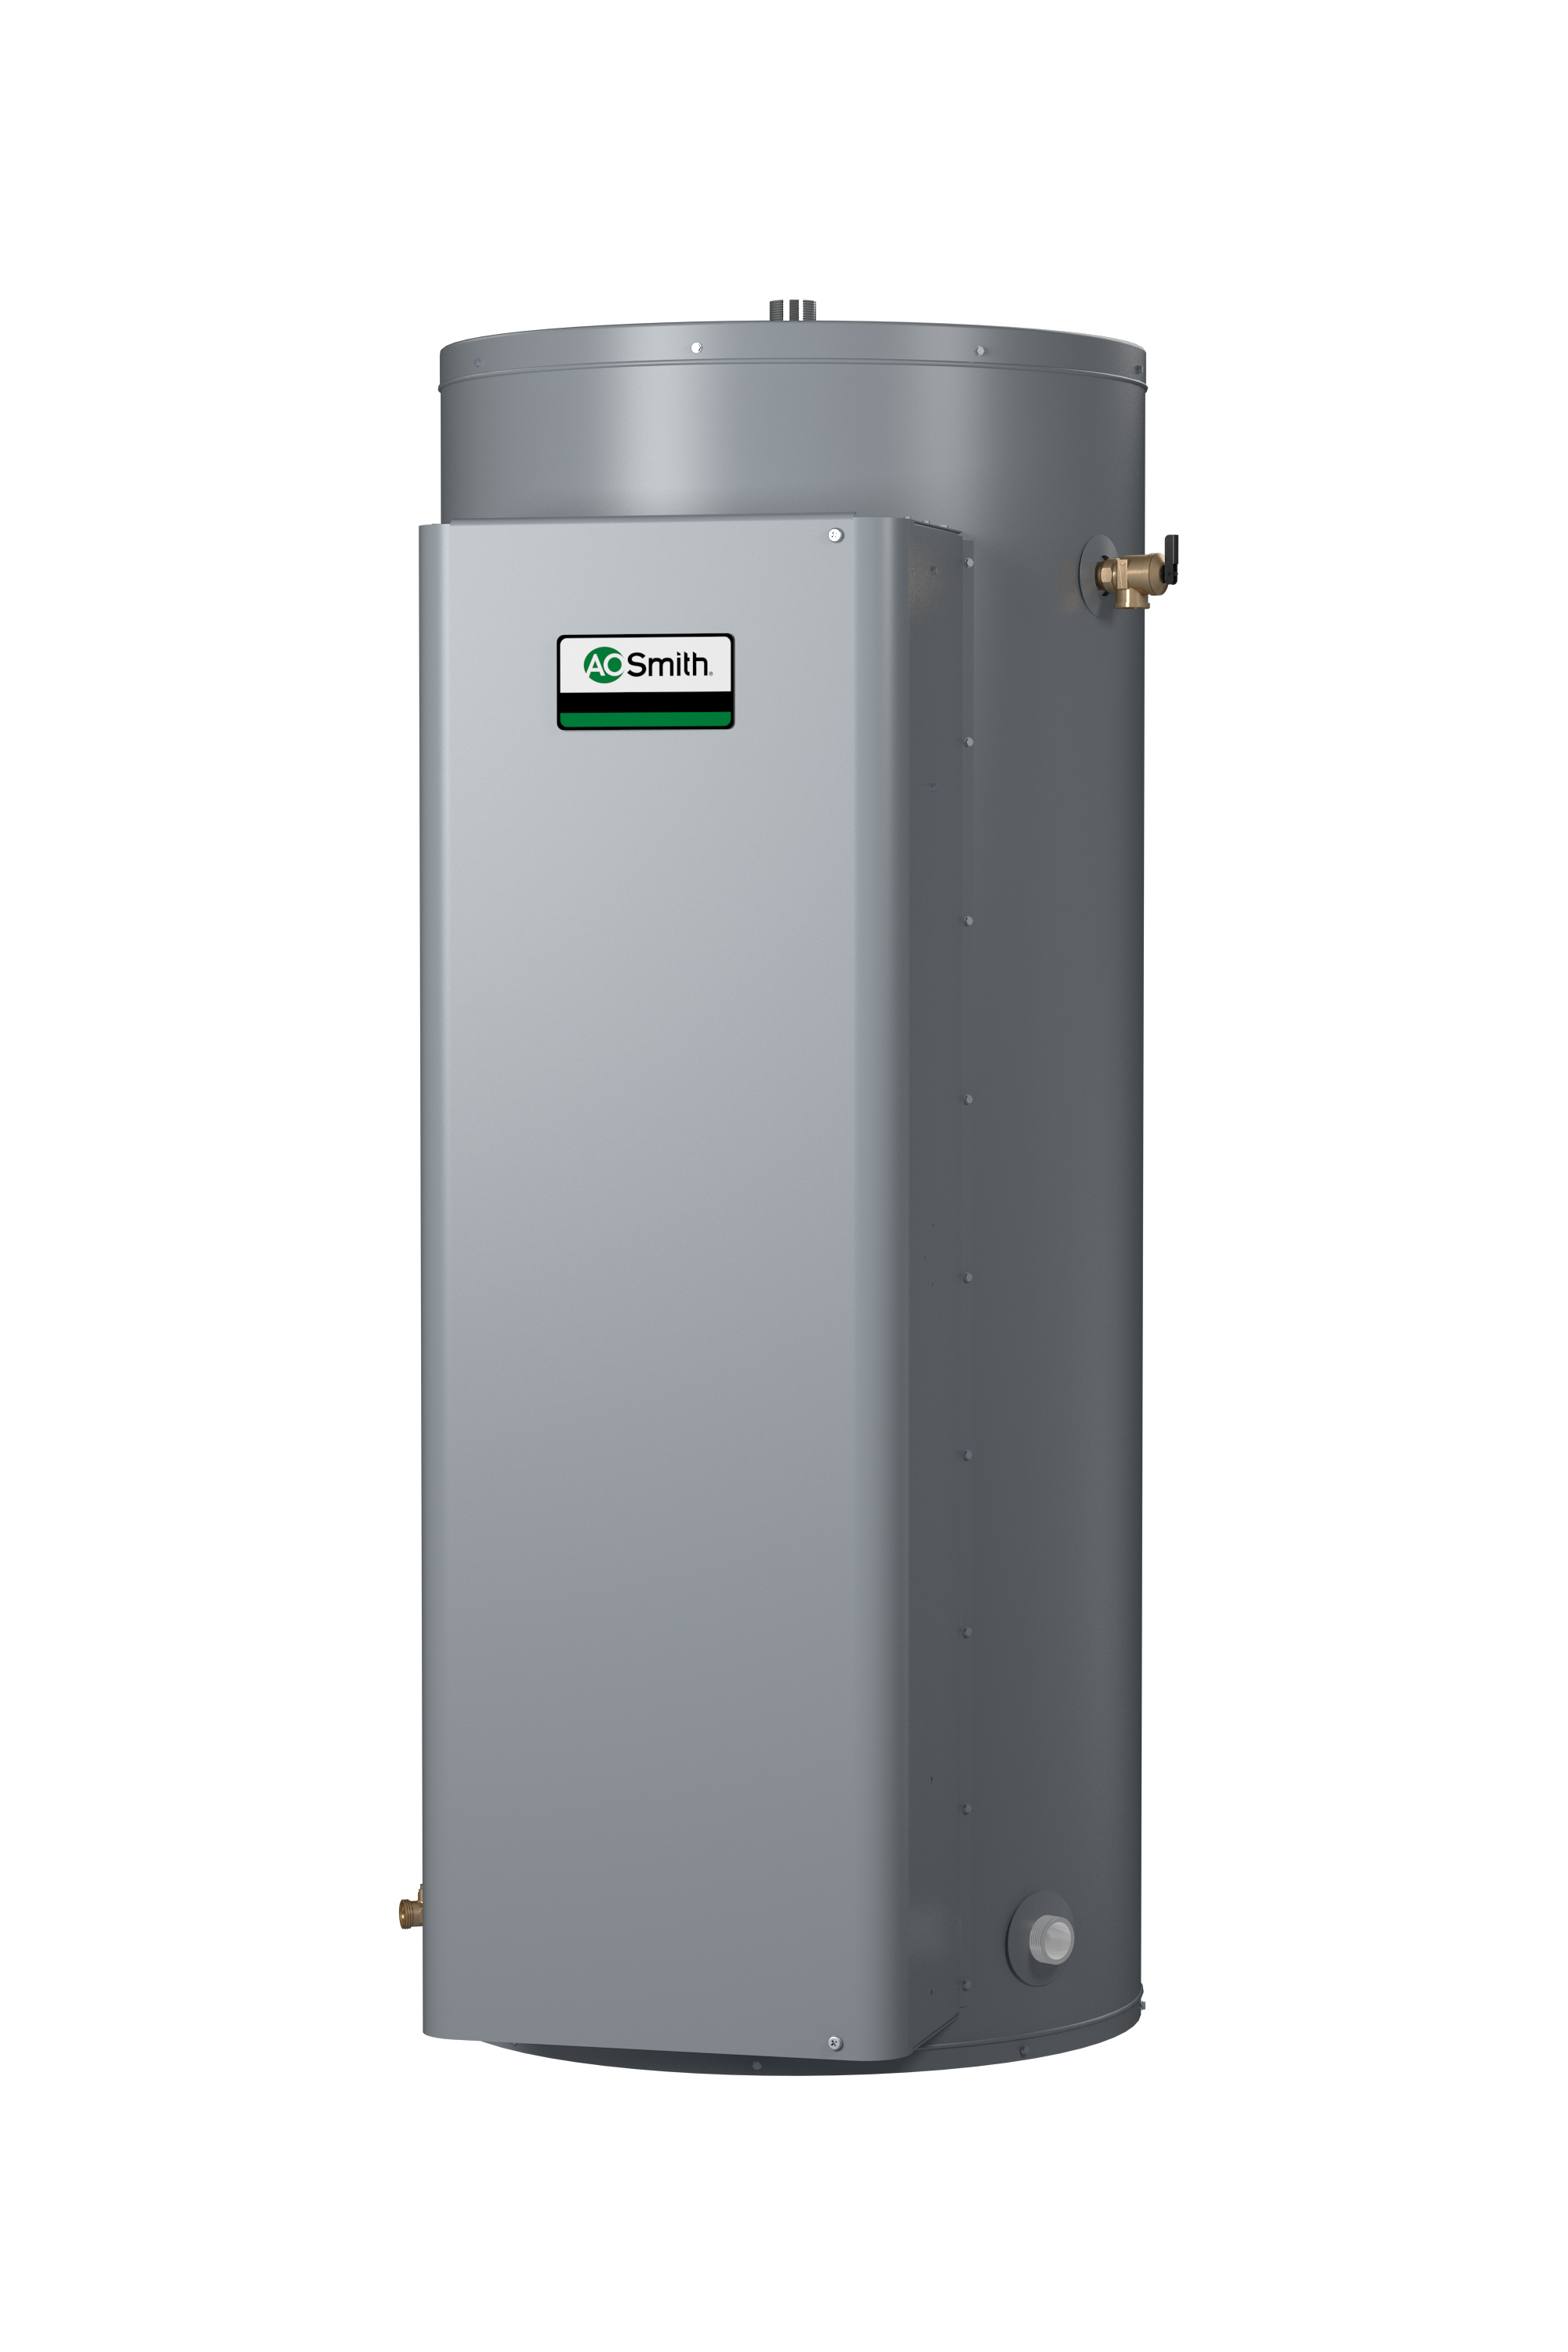 AO SMITH DRE-120-12, 119 GALLON, 12.3KW, 240 VOLT, 28.9 AMPS, 3 PHASE, 3 ELEMENT, COMMERCIAL ELECTRIC WATER HEATER, GOLD SERIES